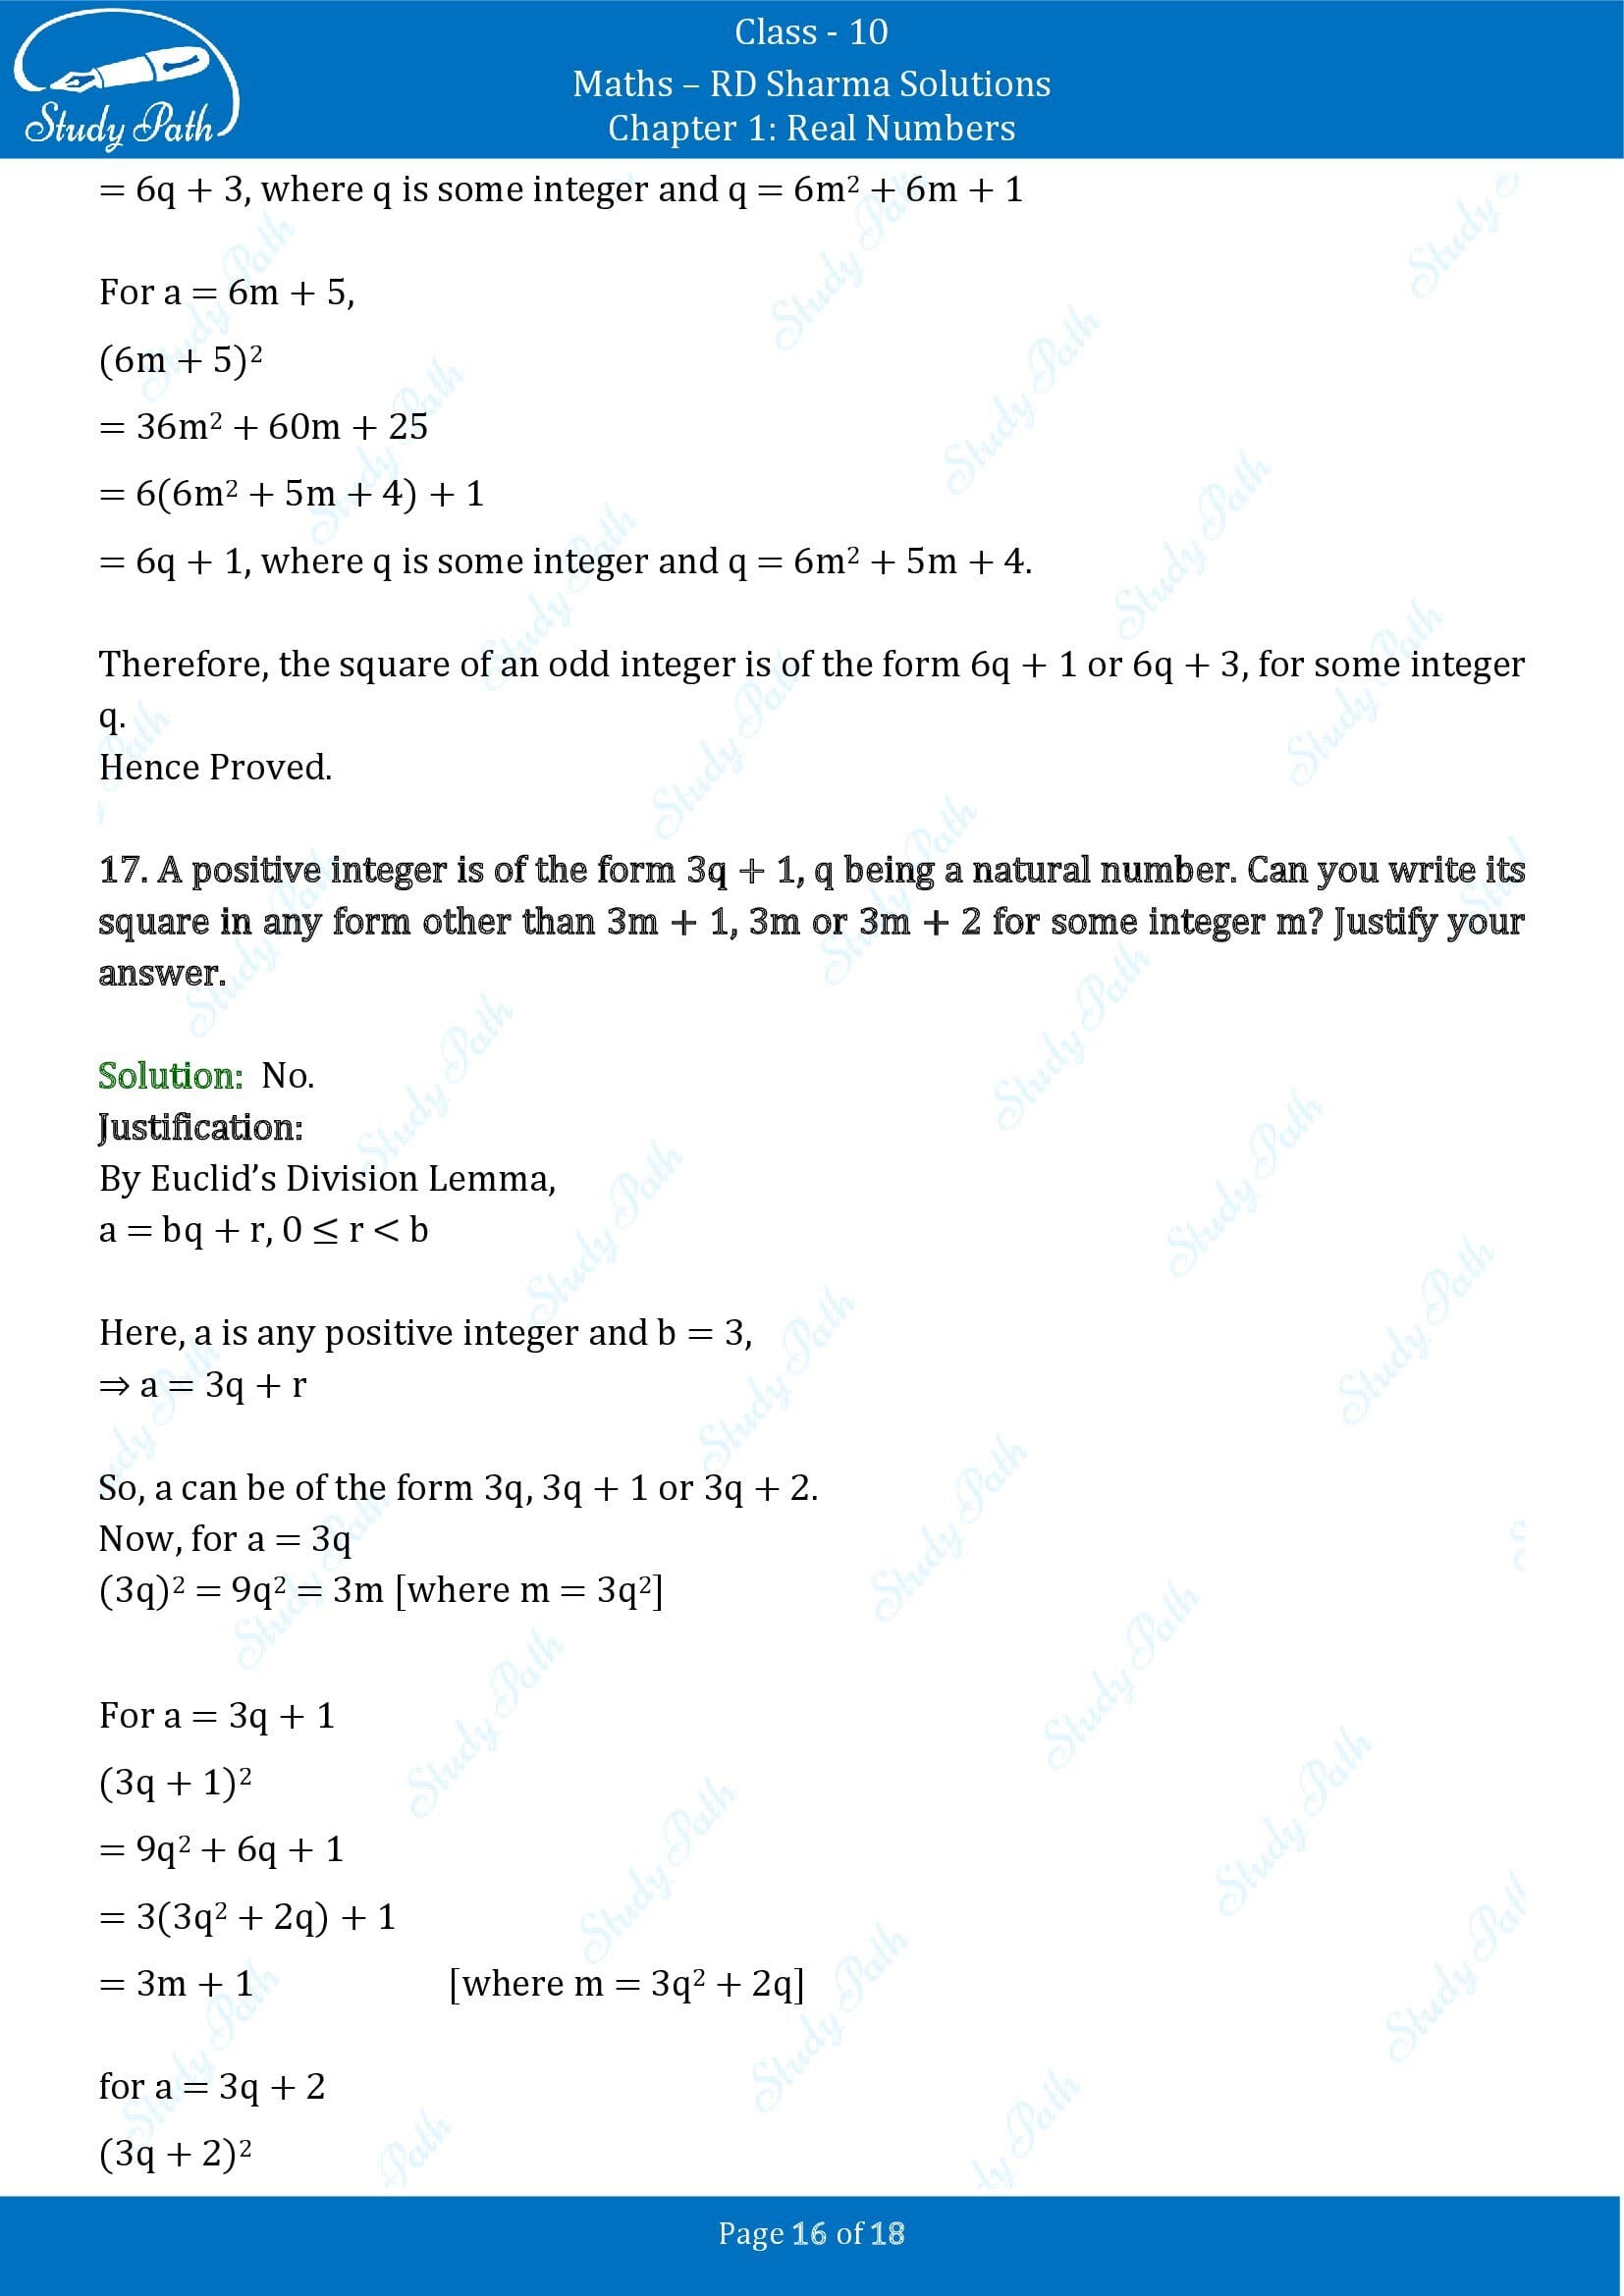 RD Sharma Solutions Class 10 Chapter 1 Real Numbers Exercise 1.1 00016